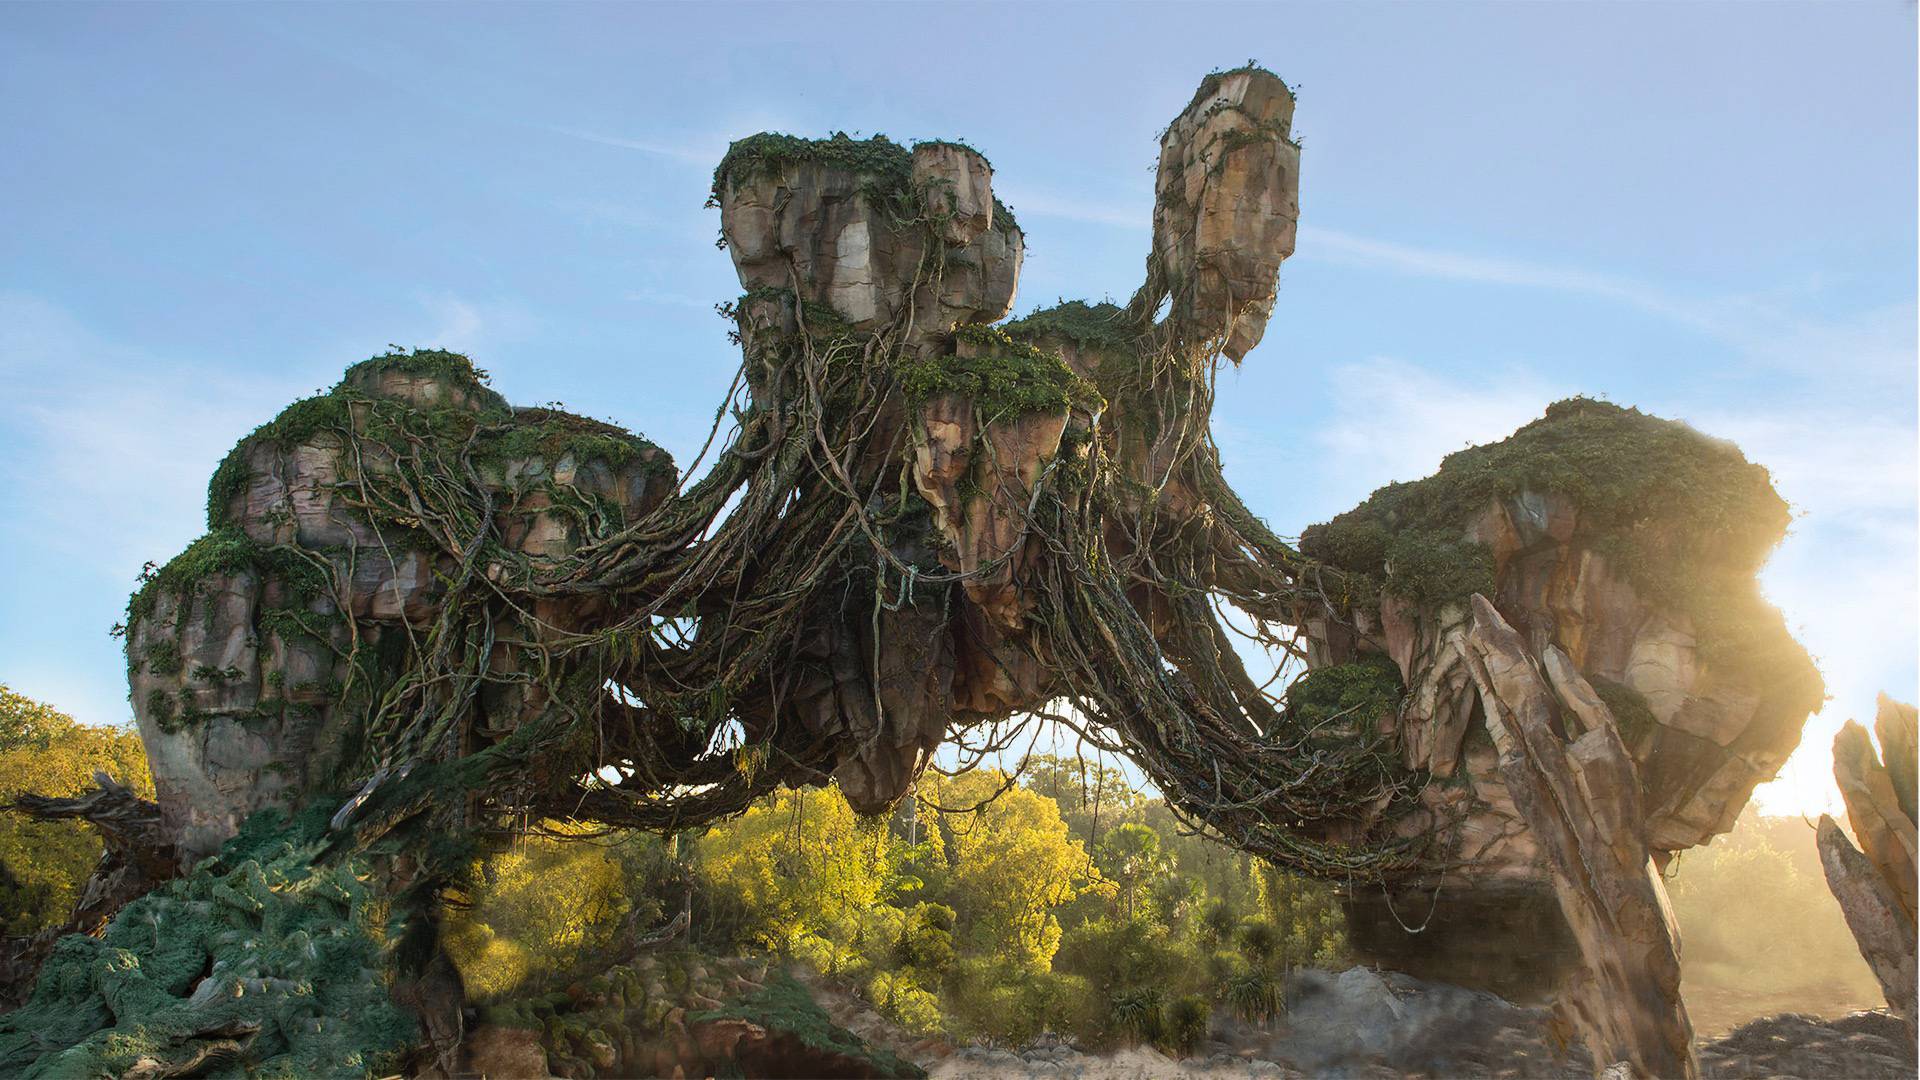 Environment and rockwork specialist Zsolt Hormay recruited back to Imagineering to produce AVATARland exterior environments